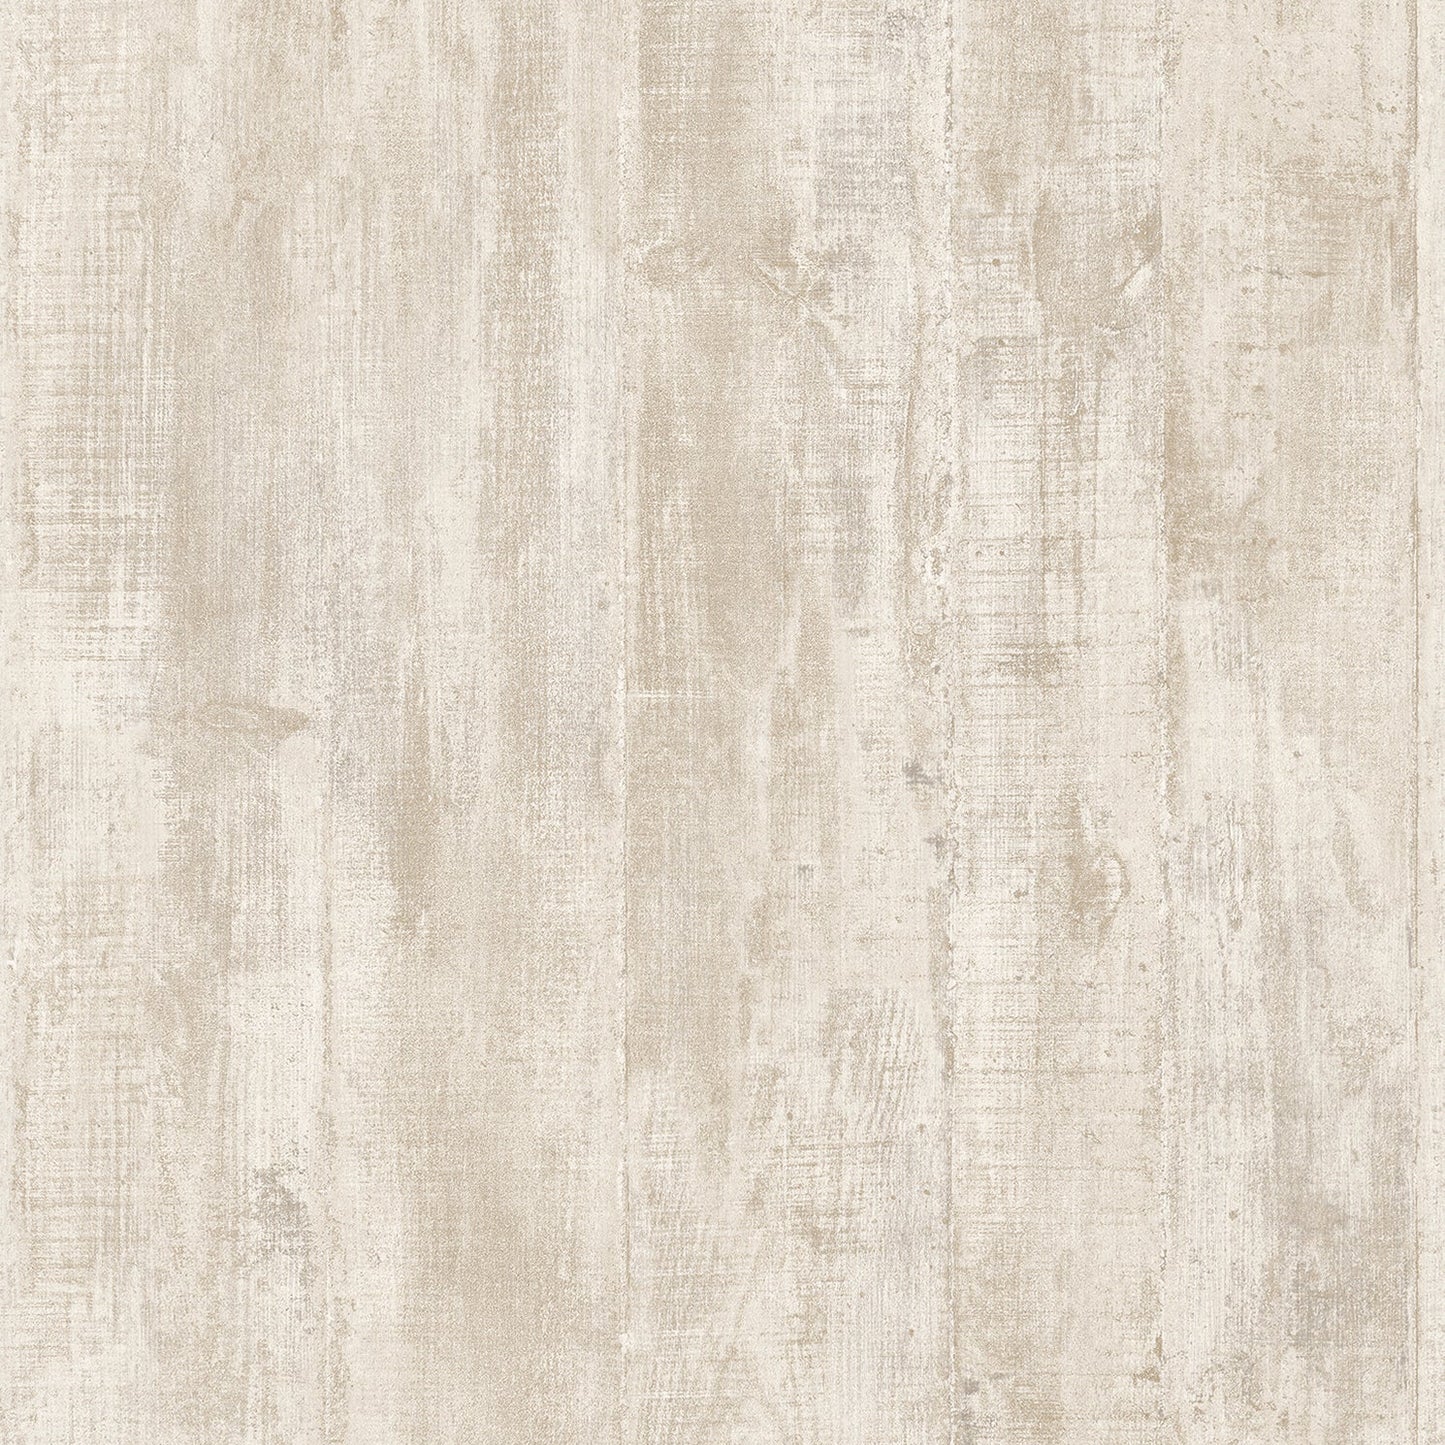 Search 4020-68317 Geo & Textures Huck Cream Weathered Wood Plank Cream by Advantage